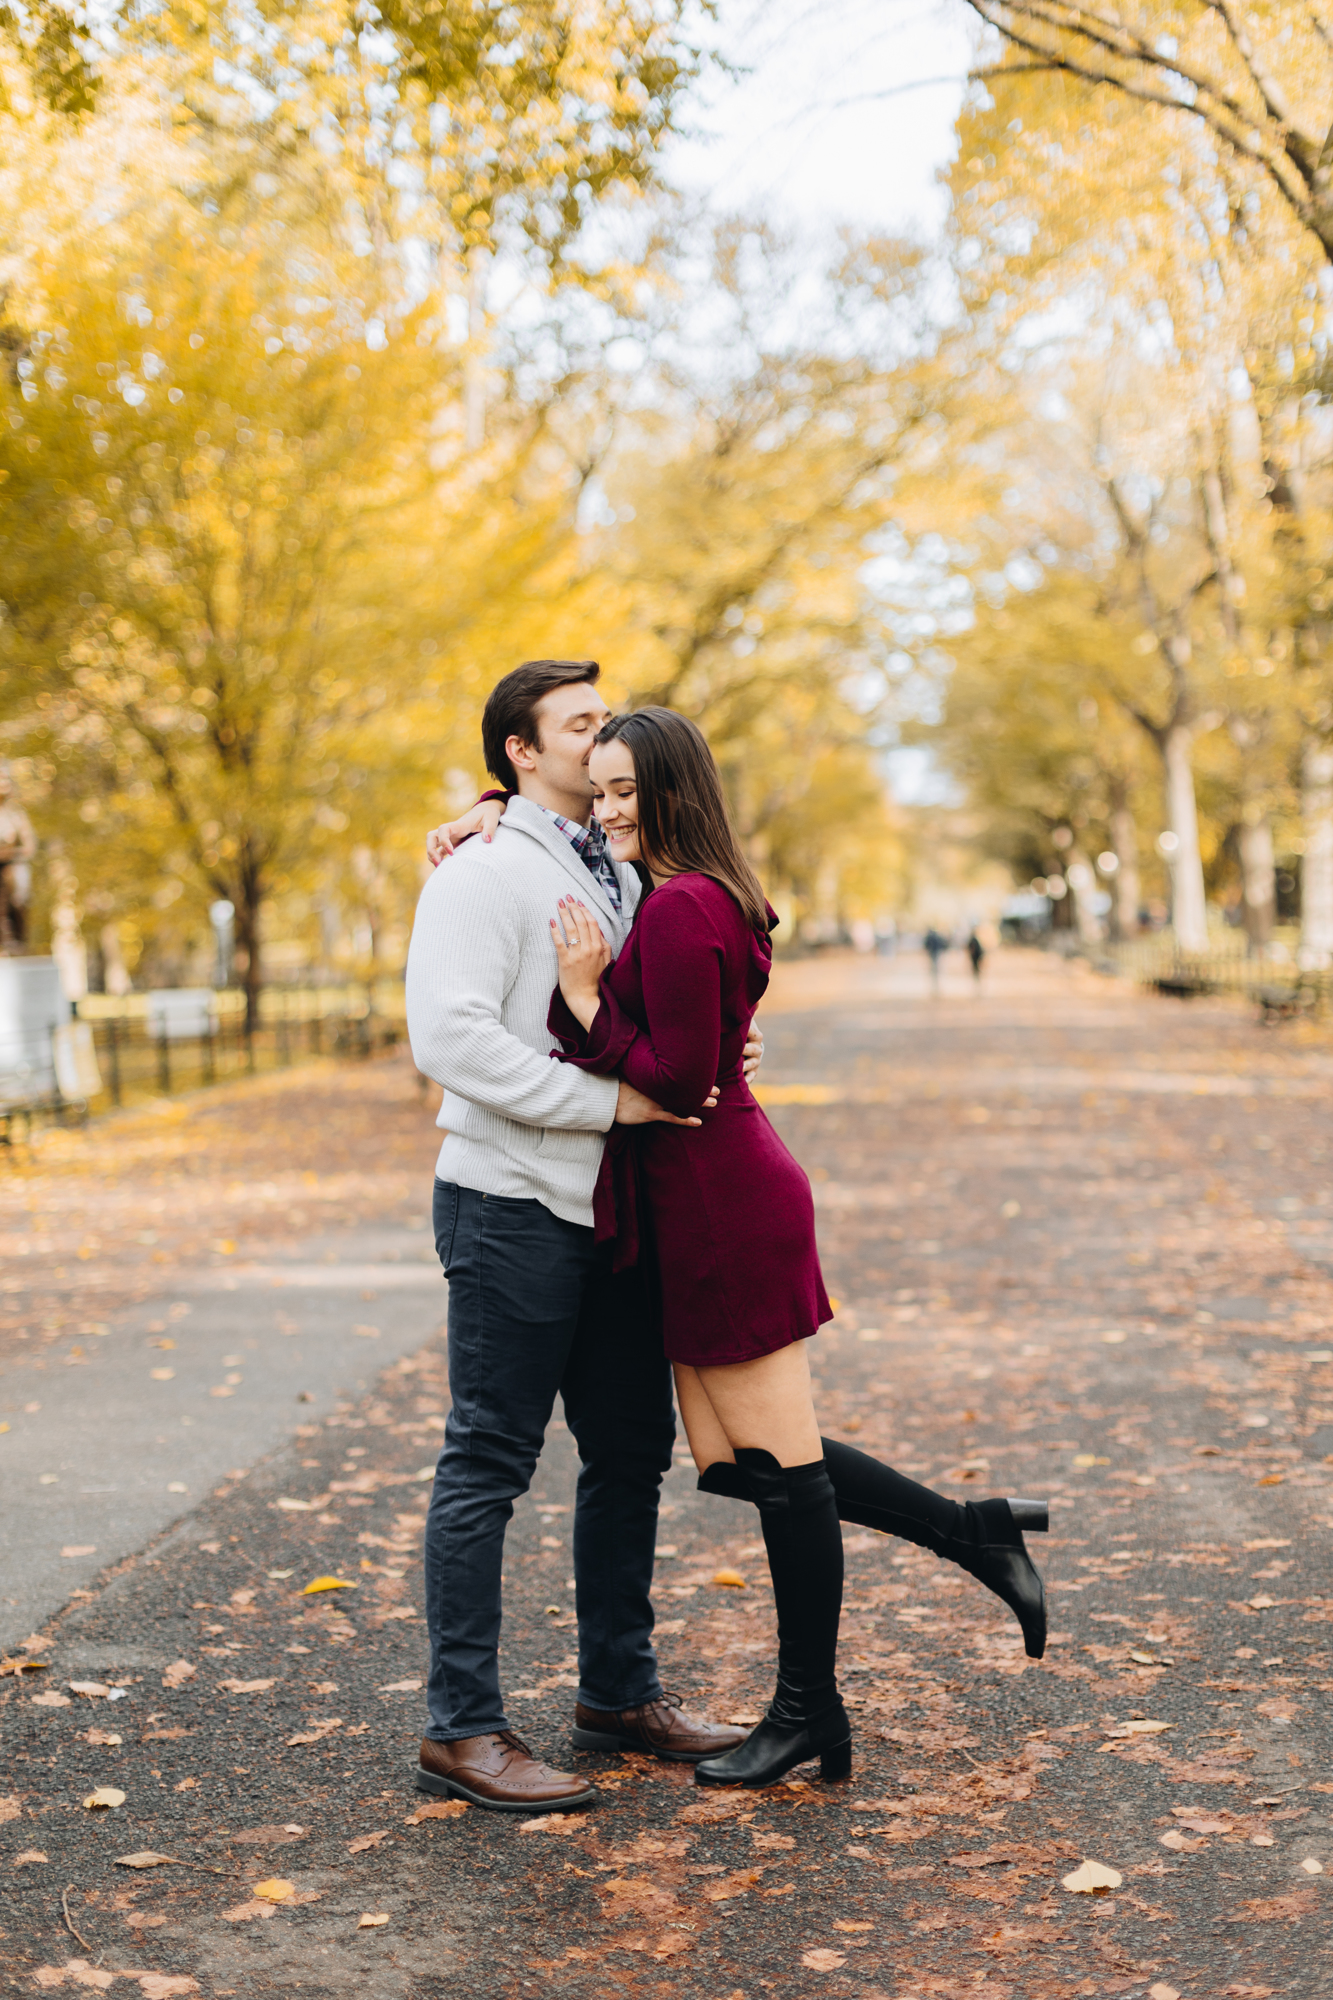 Beautiful Fall Engagement Photos in Central Park New York